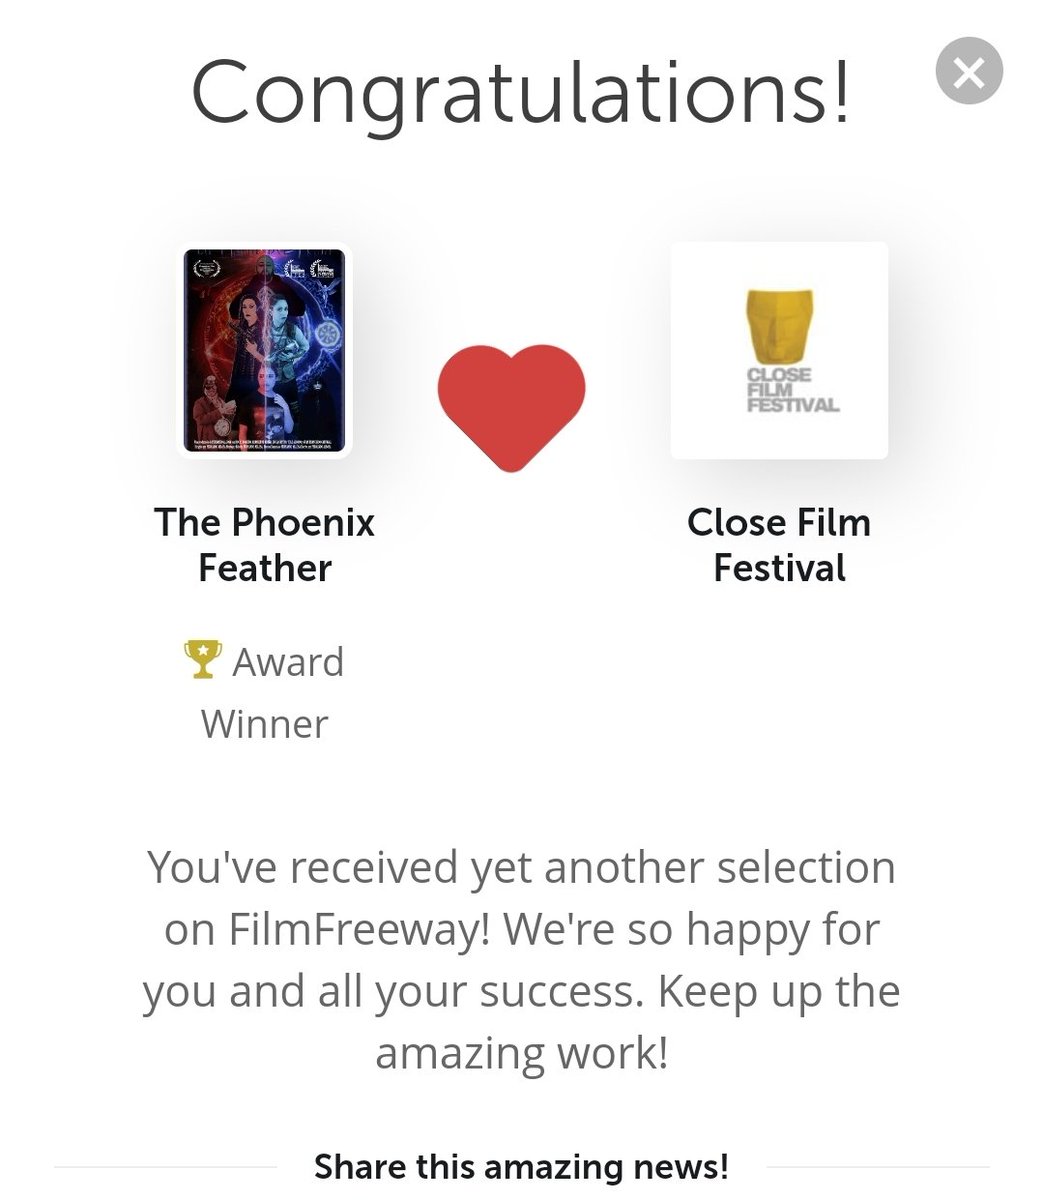 Amazing news! The Phoenix Feather was just selected by Close Film Festival via @FilmFreeway 
#movie #award #moviedirector #writer #movies #movieawards #filmfestival #filmfestivals #laurel #laurels #officialselection #shortfilm #indiefilm